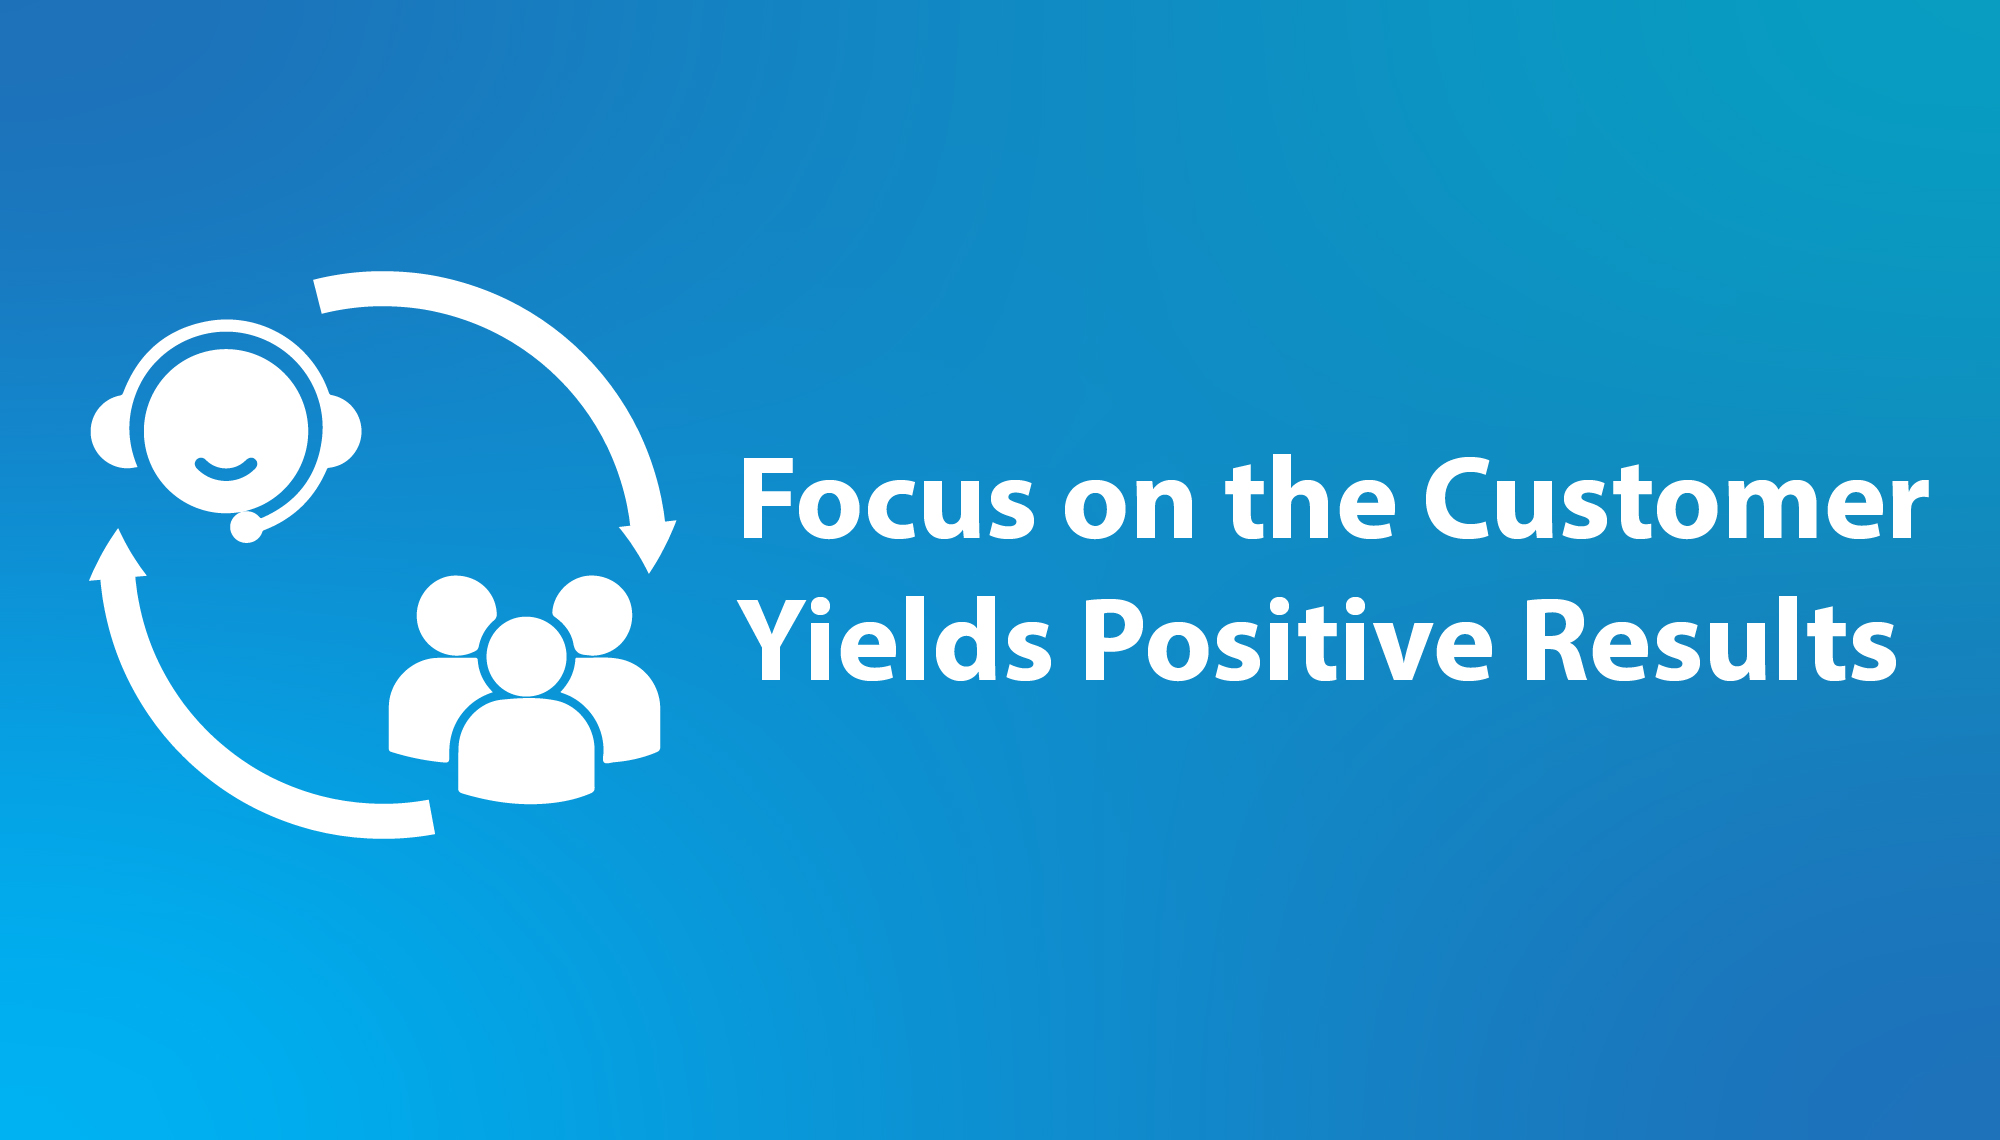 Focus on the Customer Yields Positive Results